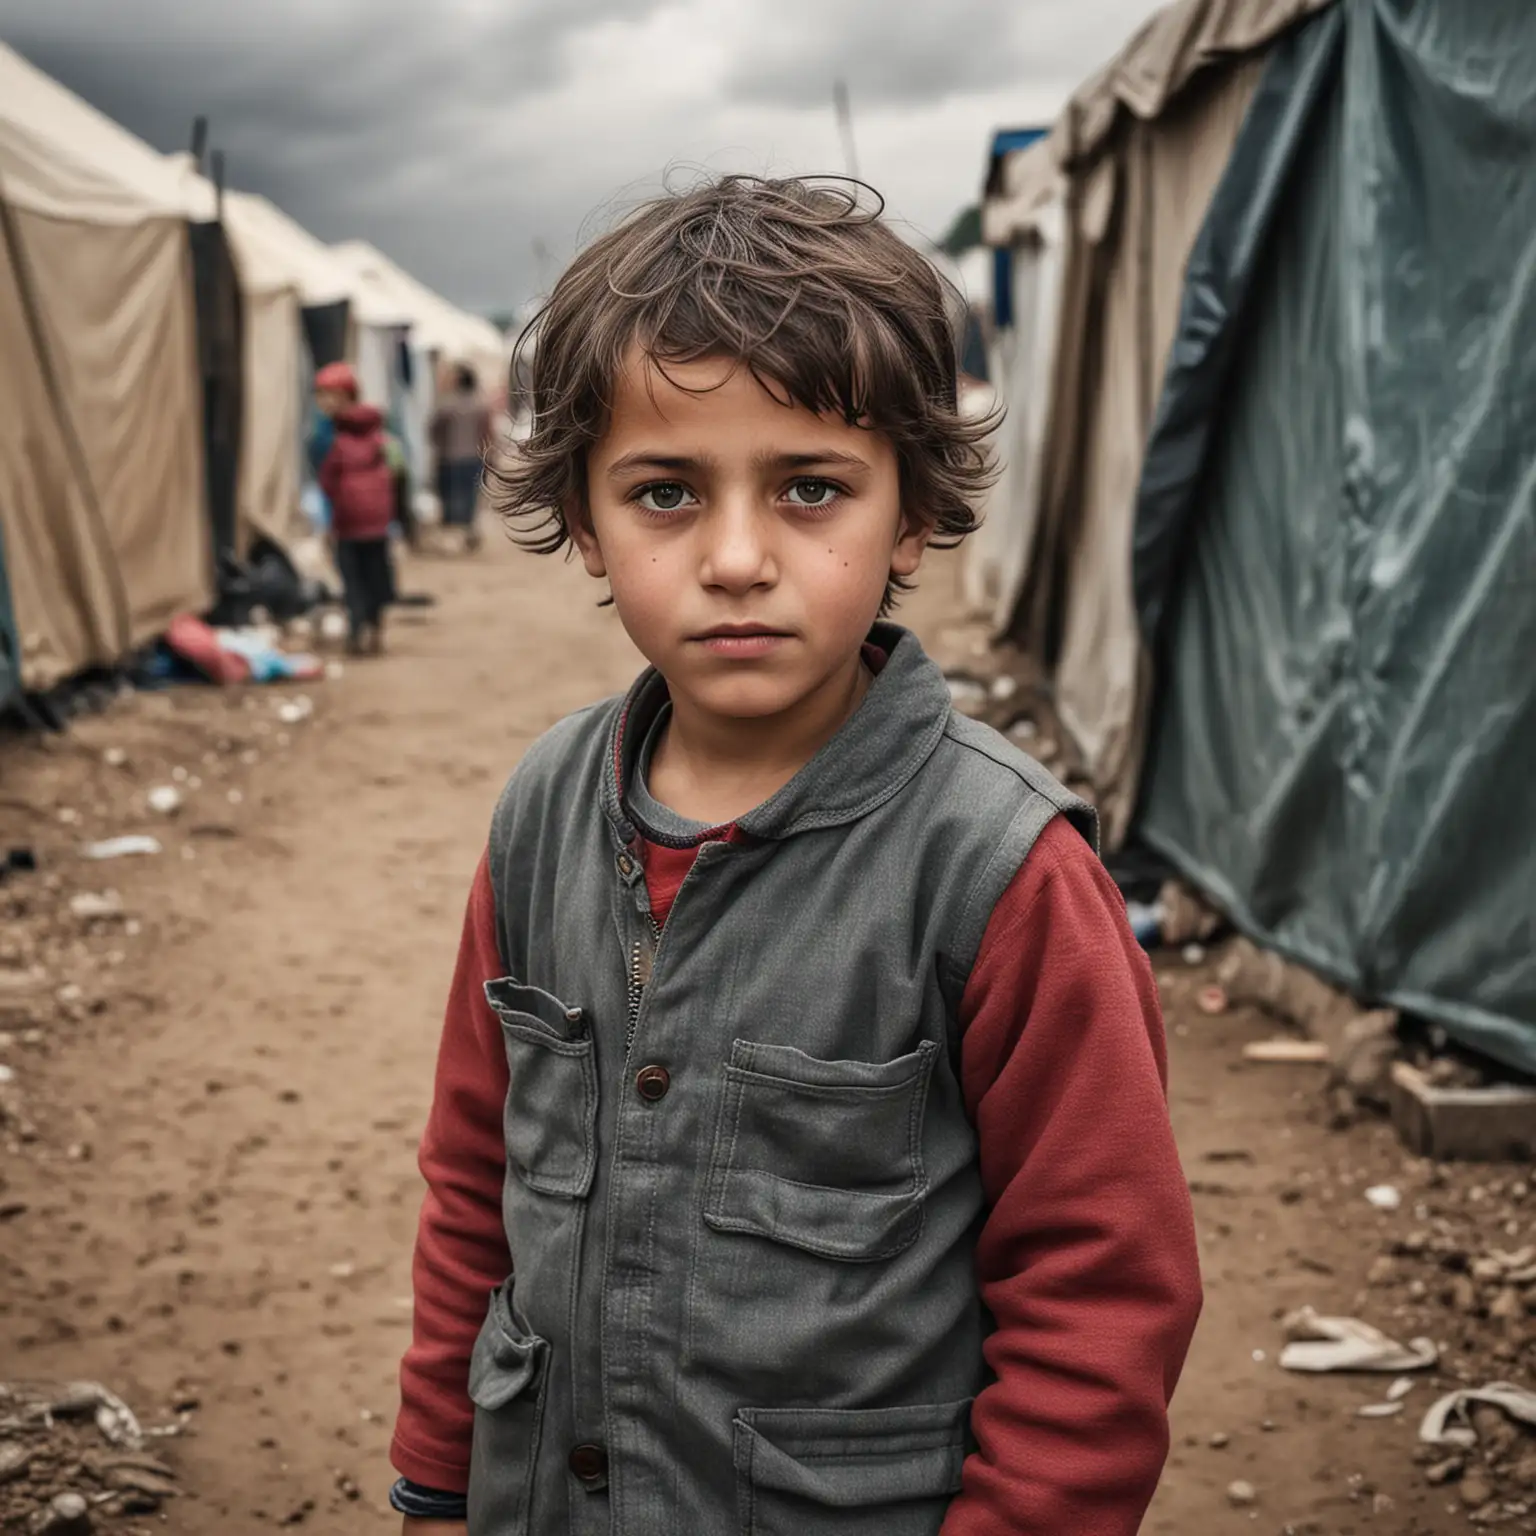 A realistic photograph of a refugee child in a camp